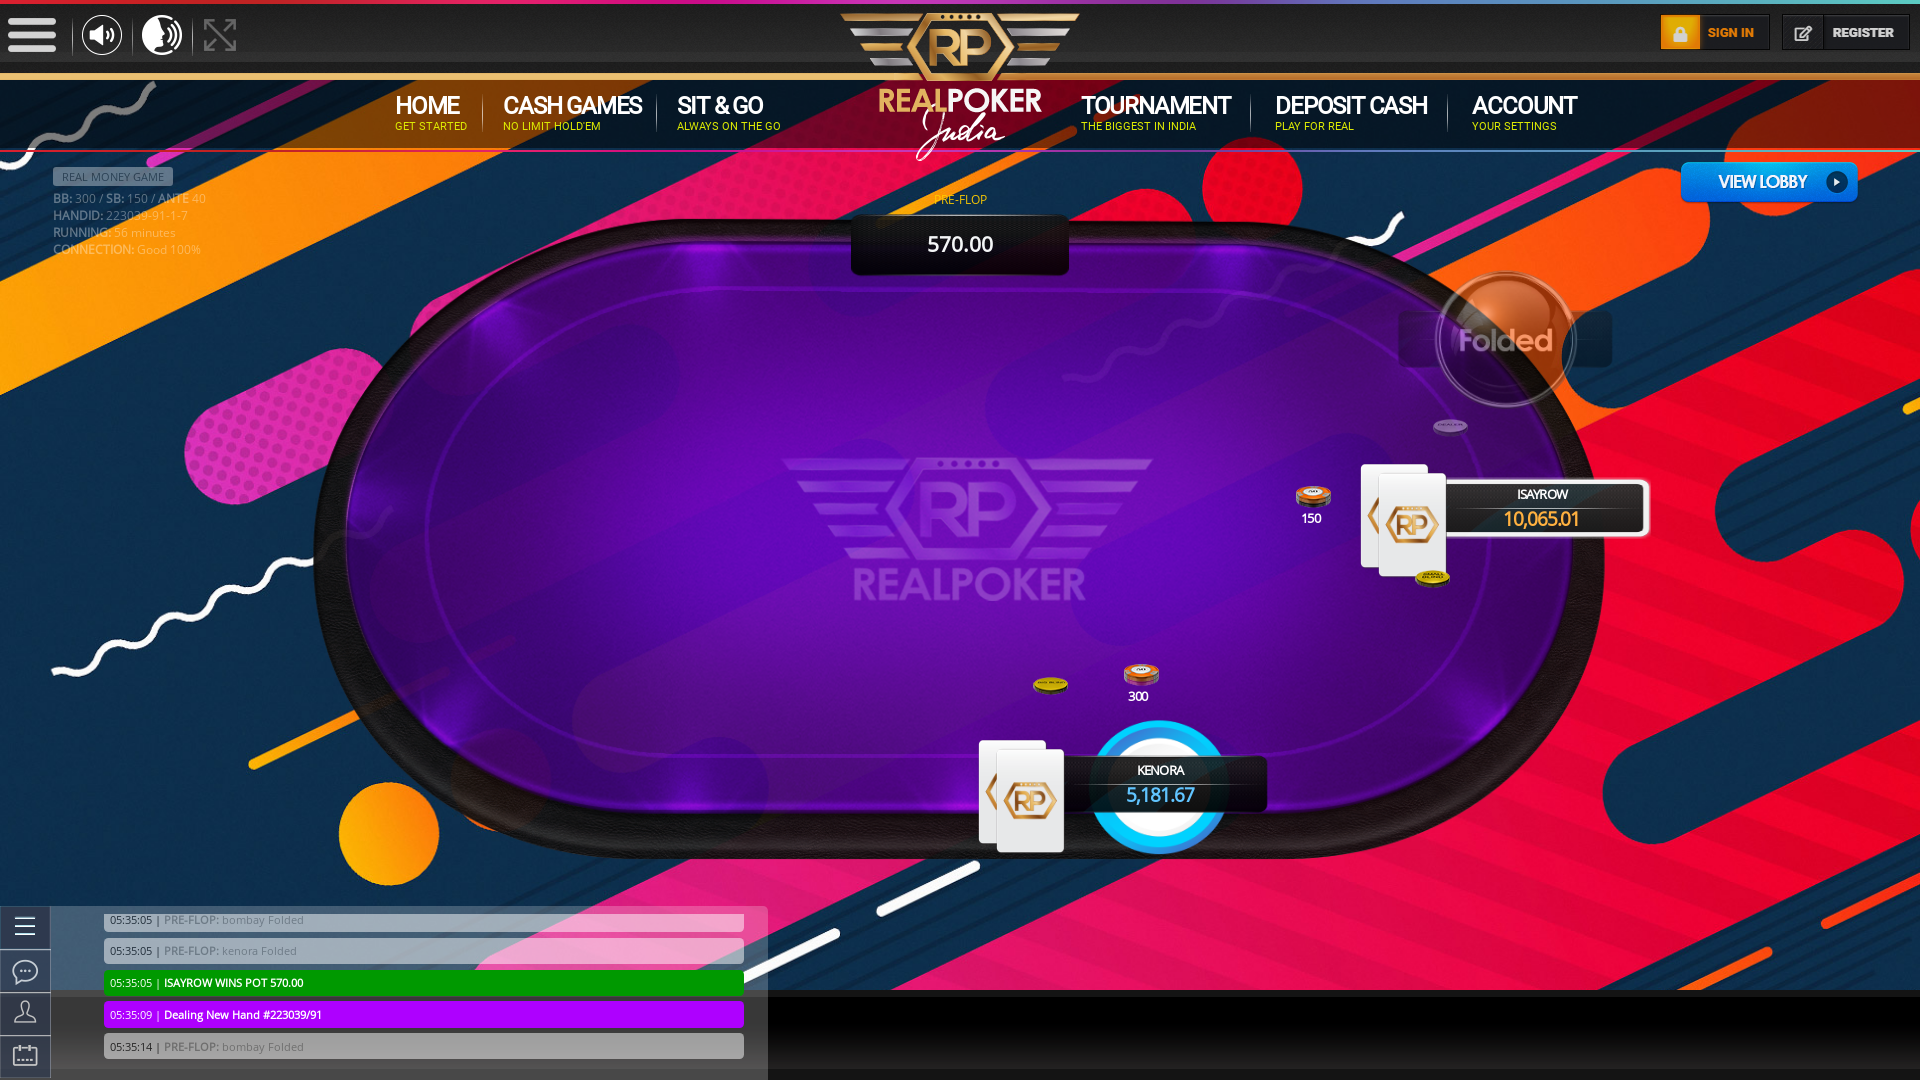 Real poker 10 player table in the 56th minute